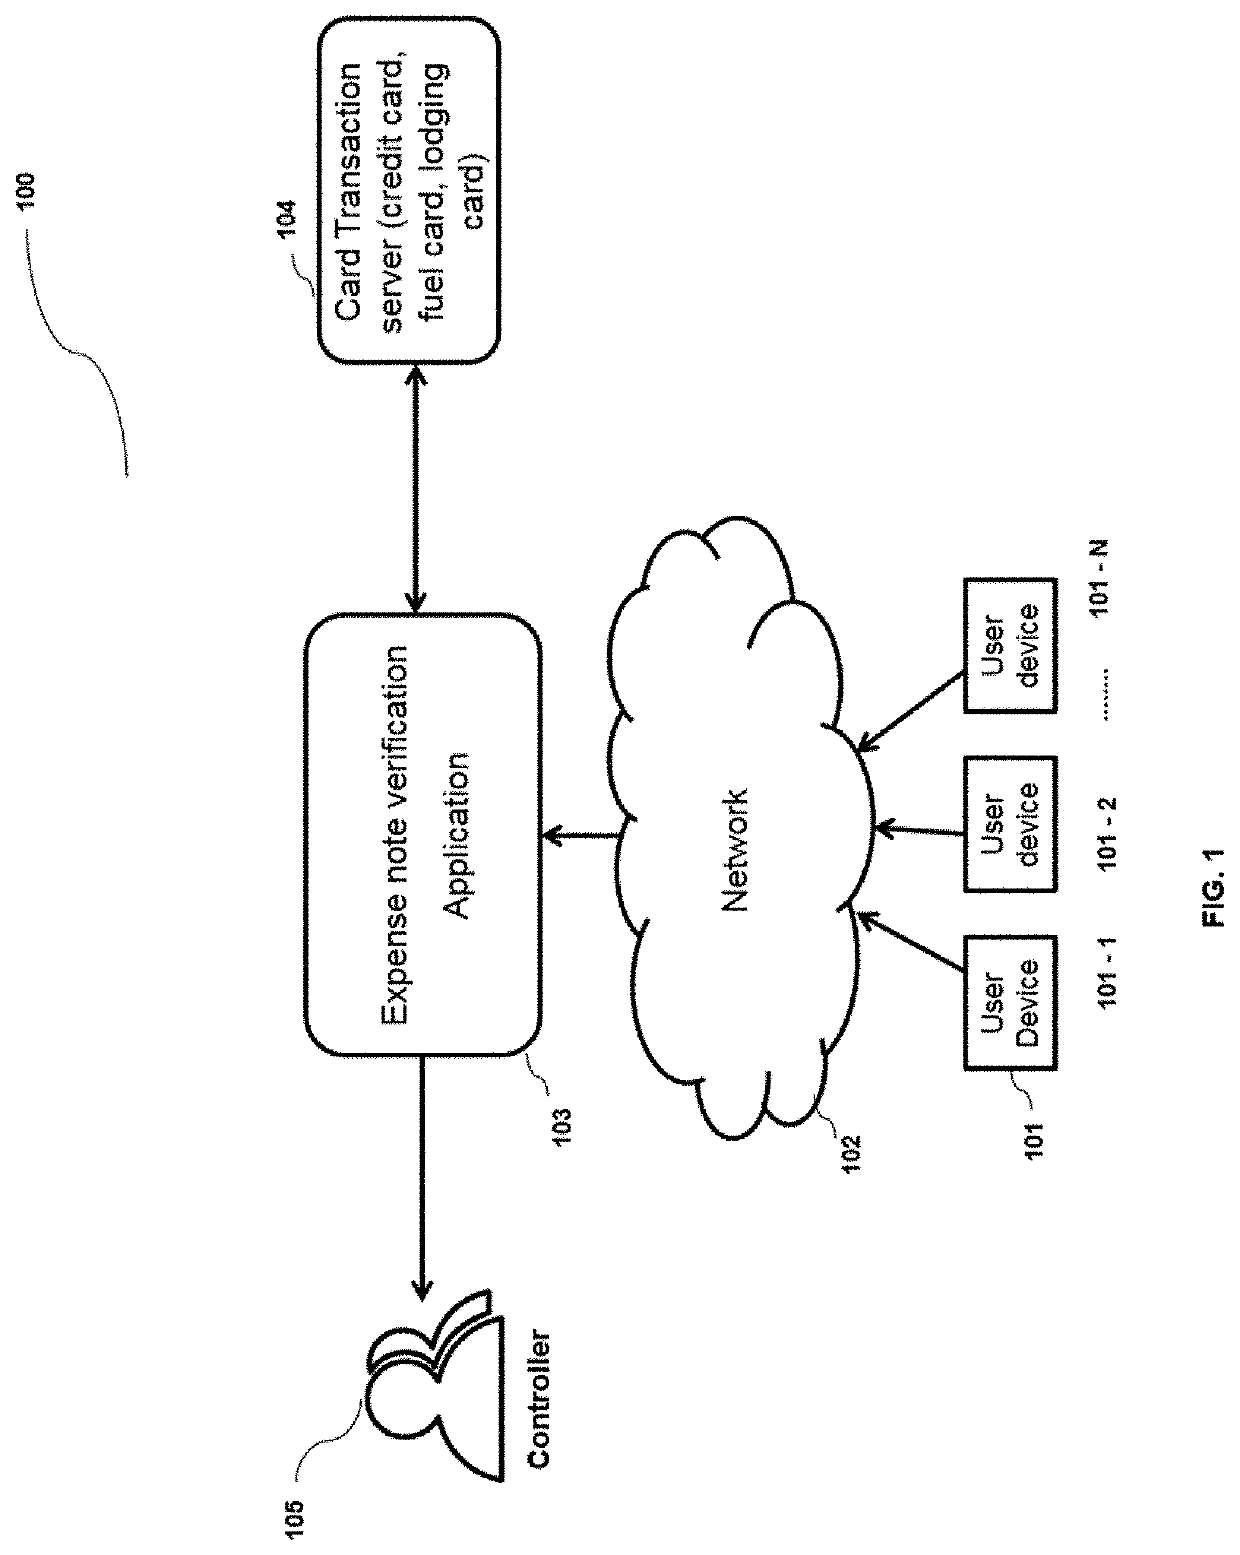 System and method for automatic verification of expense note